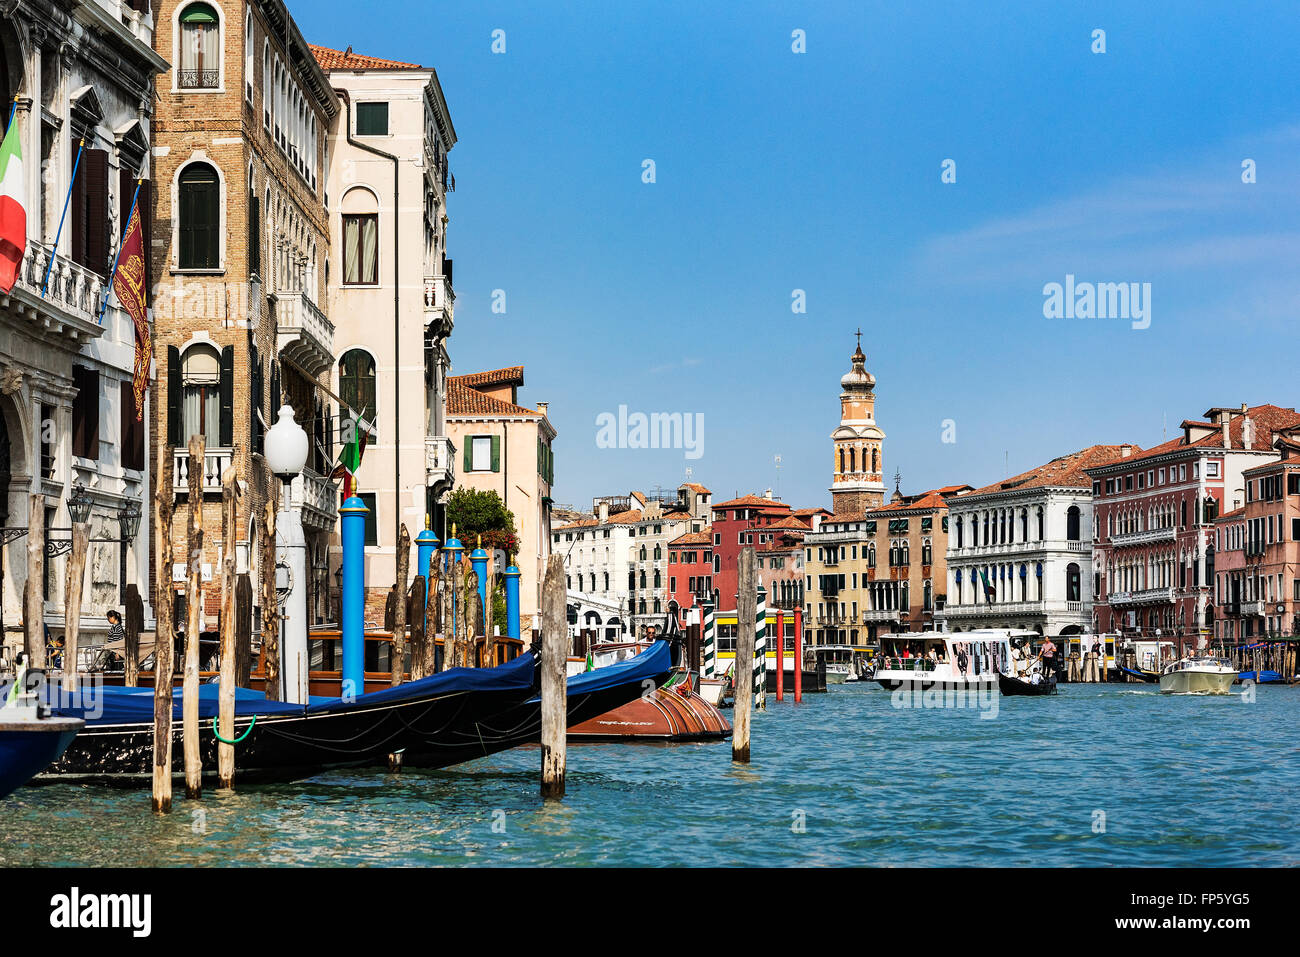 Gondoliers navigate the canals of Venice, Italy Stock Photo